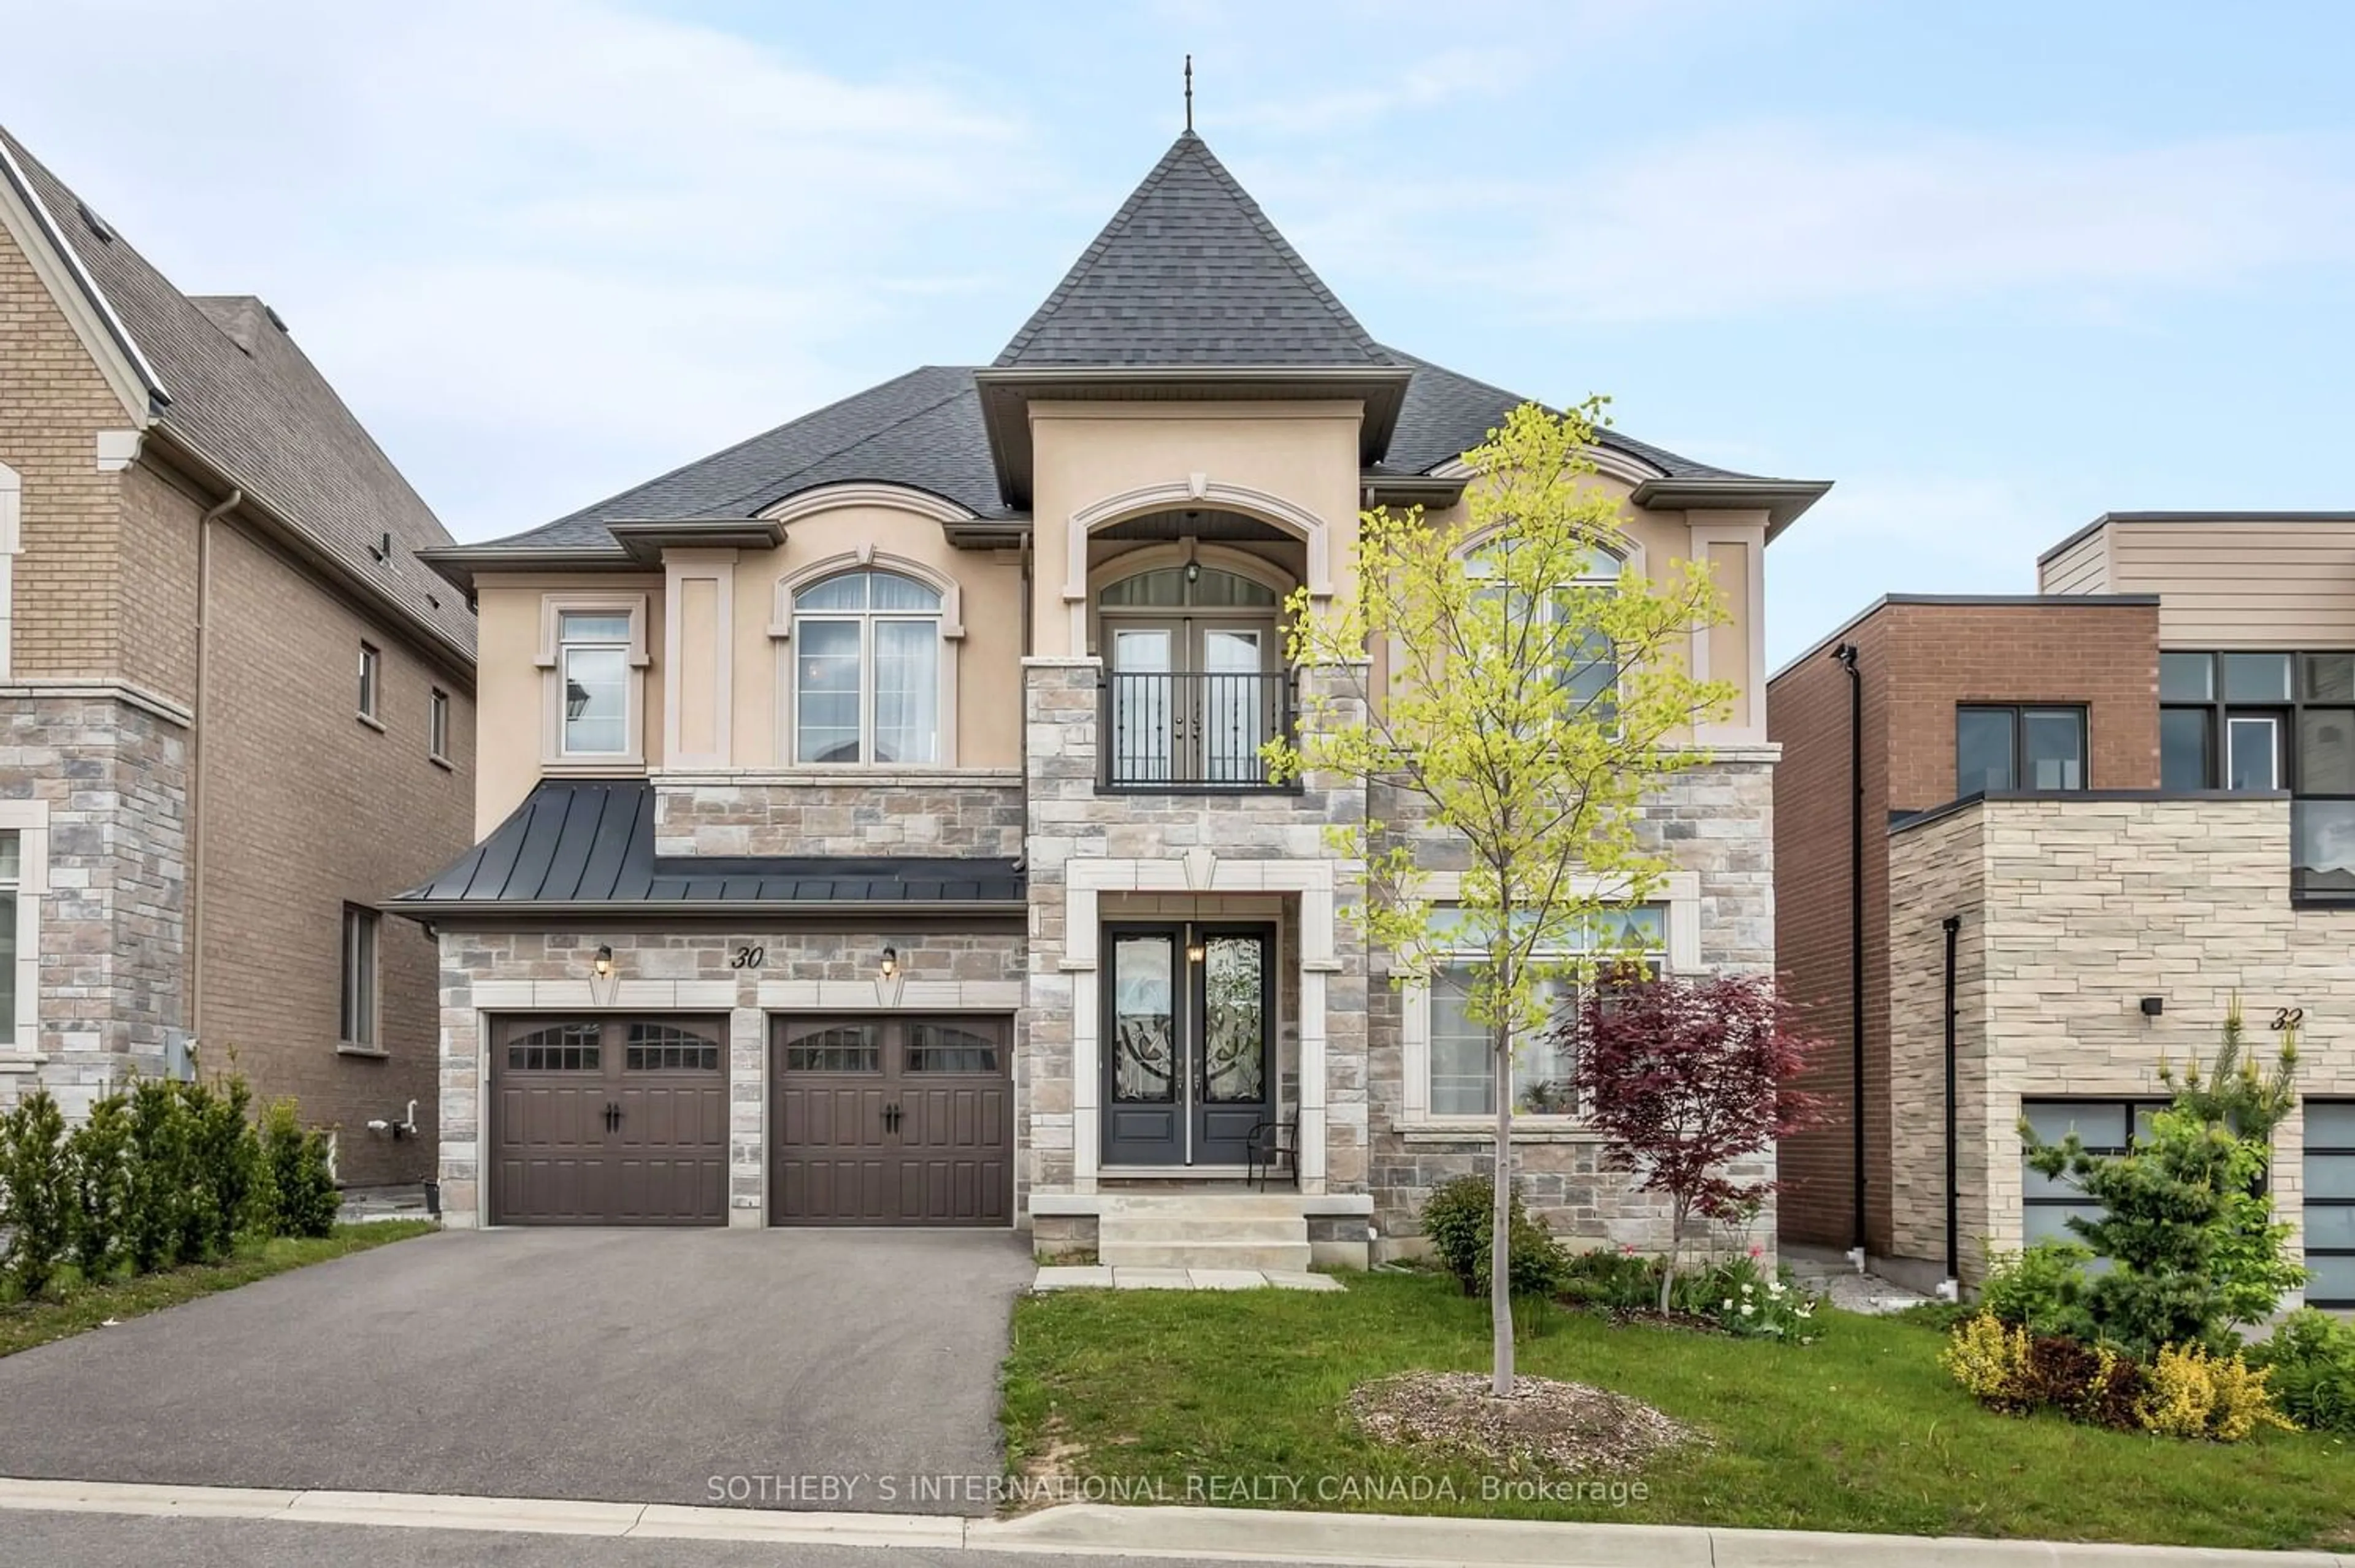 Home with brick exterior material for 30 Conger St, Vaughan Ontario L6A 4Y7